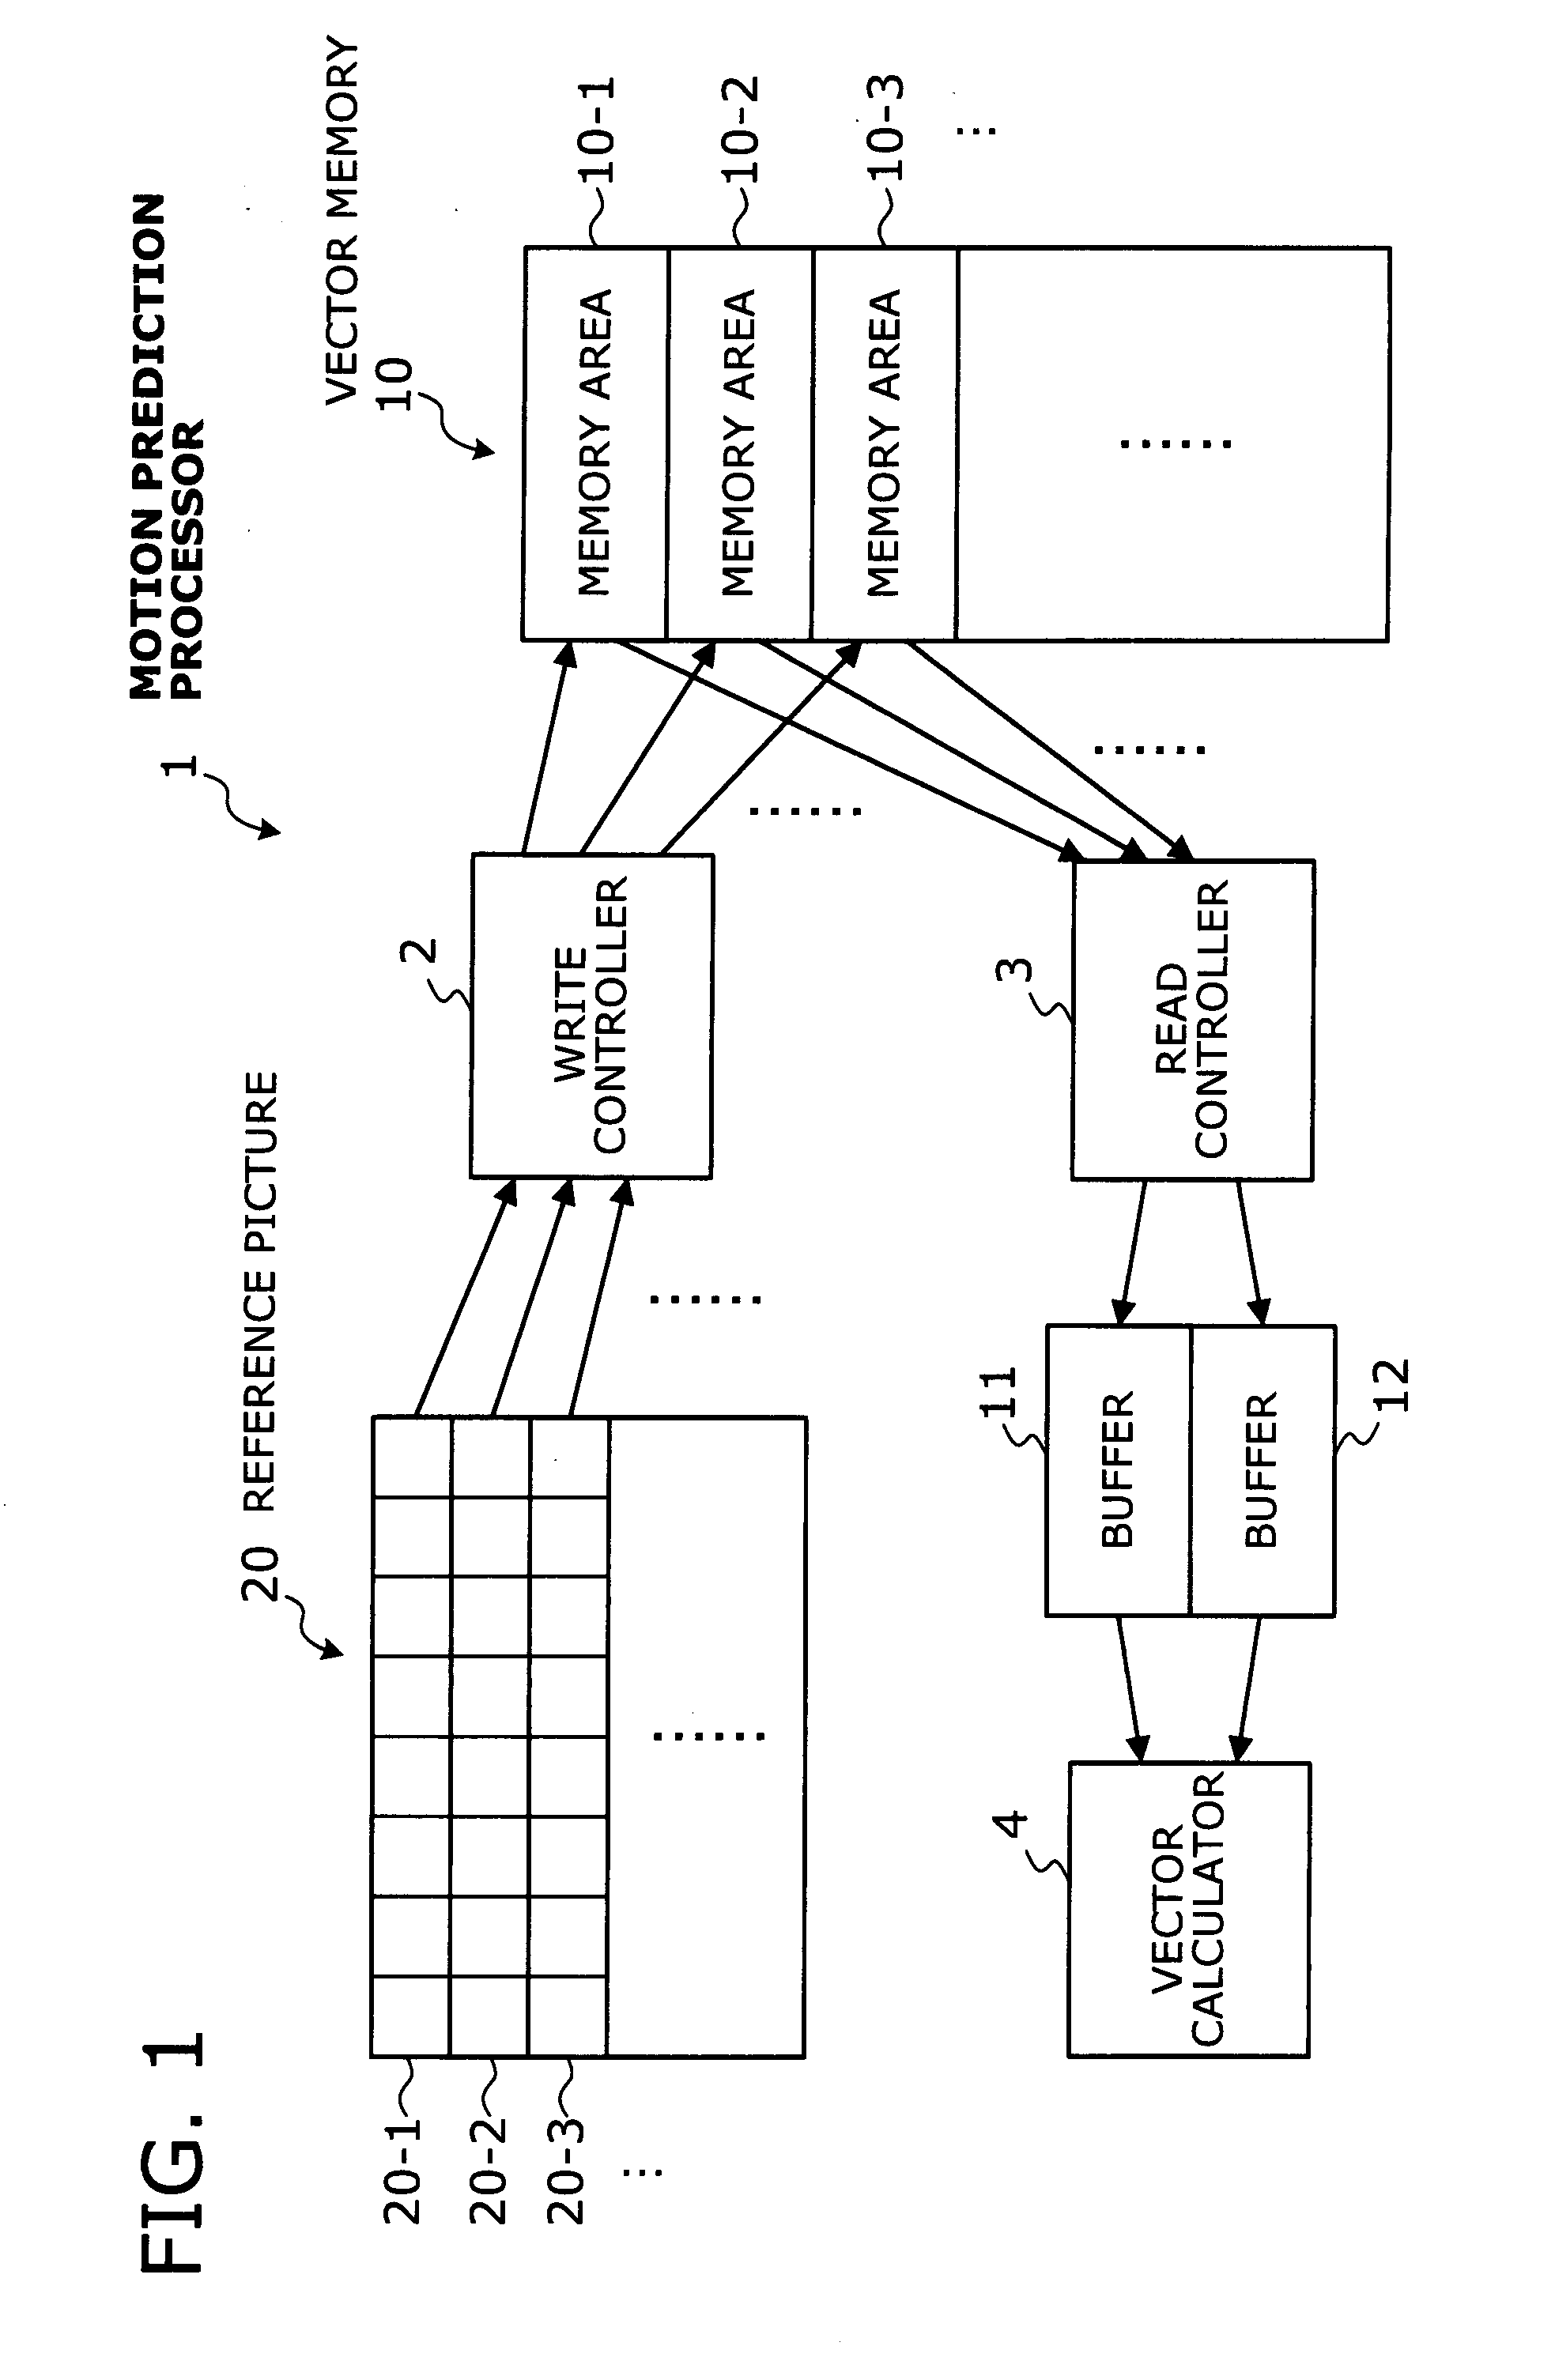 Motion prediction processor with read buffers providing reference motion vectors for direct mode coding